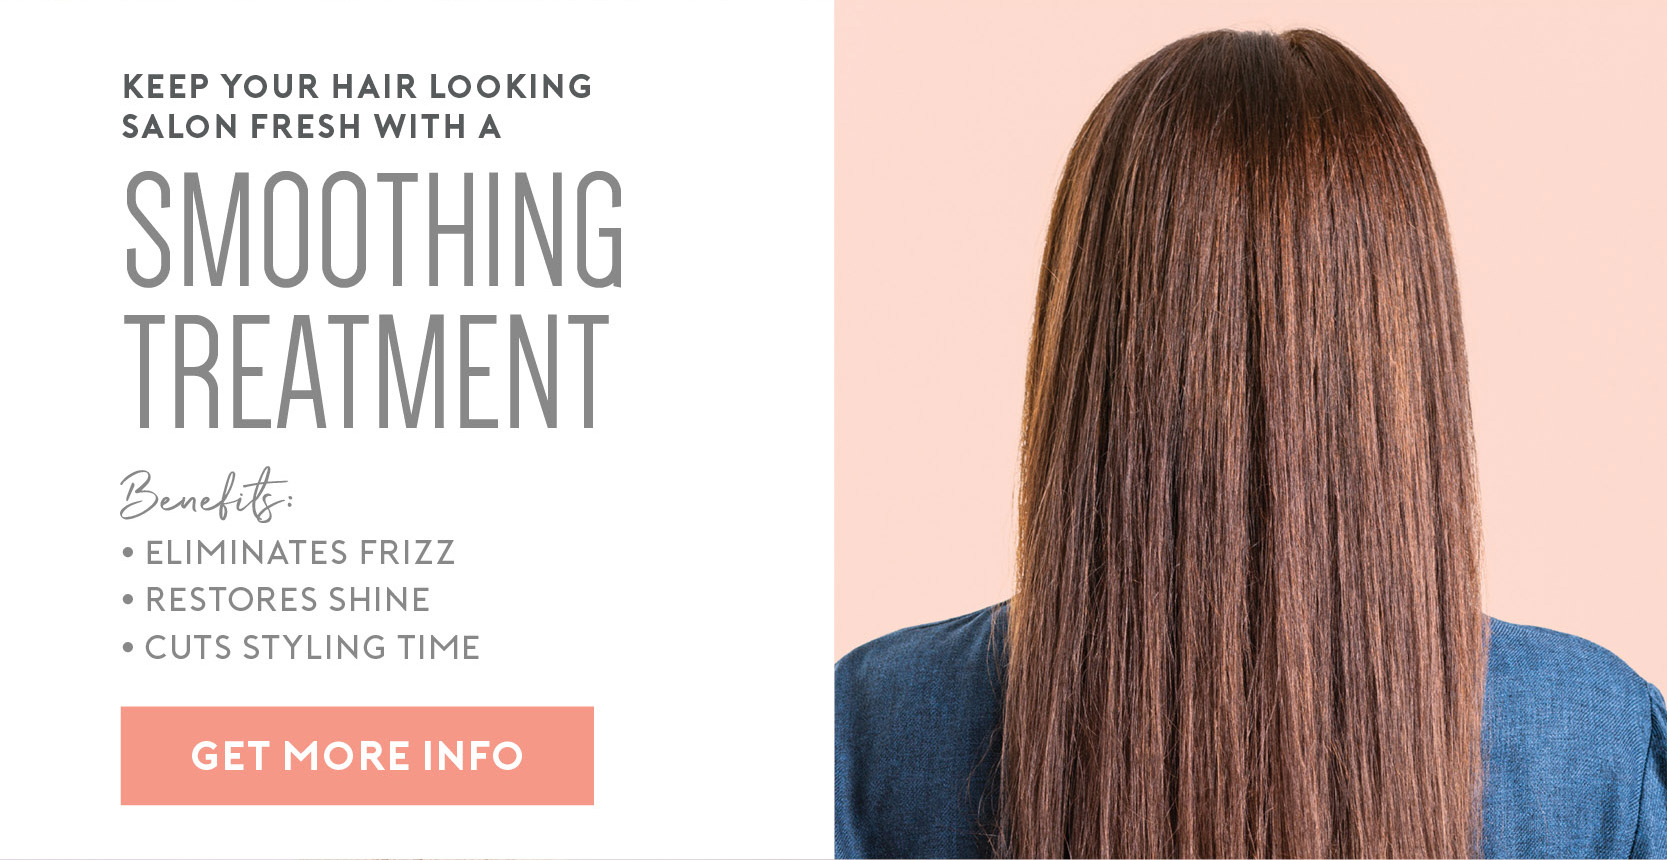 Keep your hair looking salon fresh with a Smoothing Treatment – Eliminates Frizz | Restores Shine | Cuts Styling Time